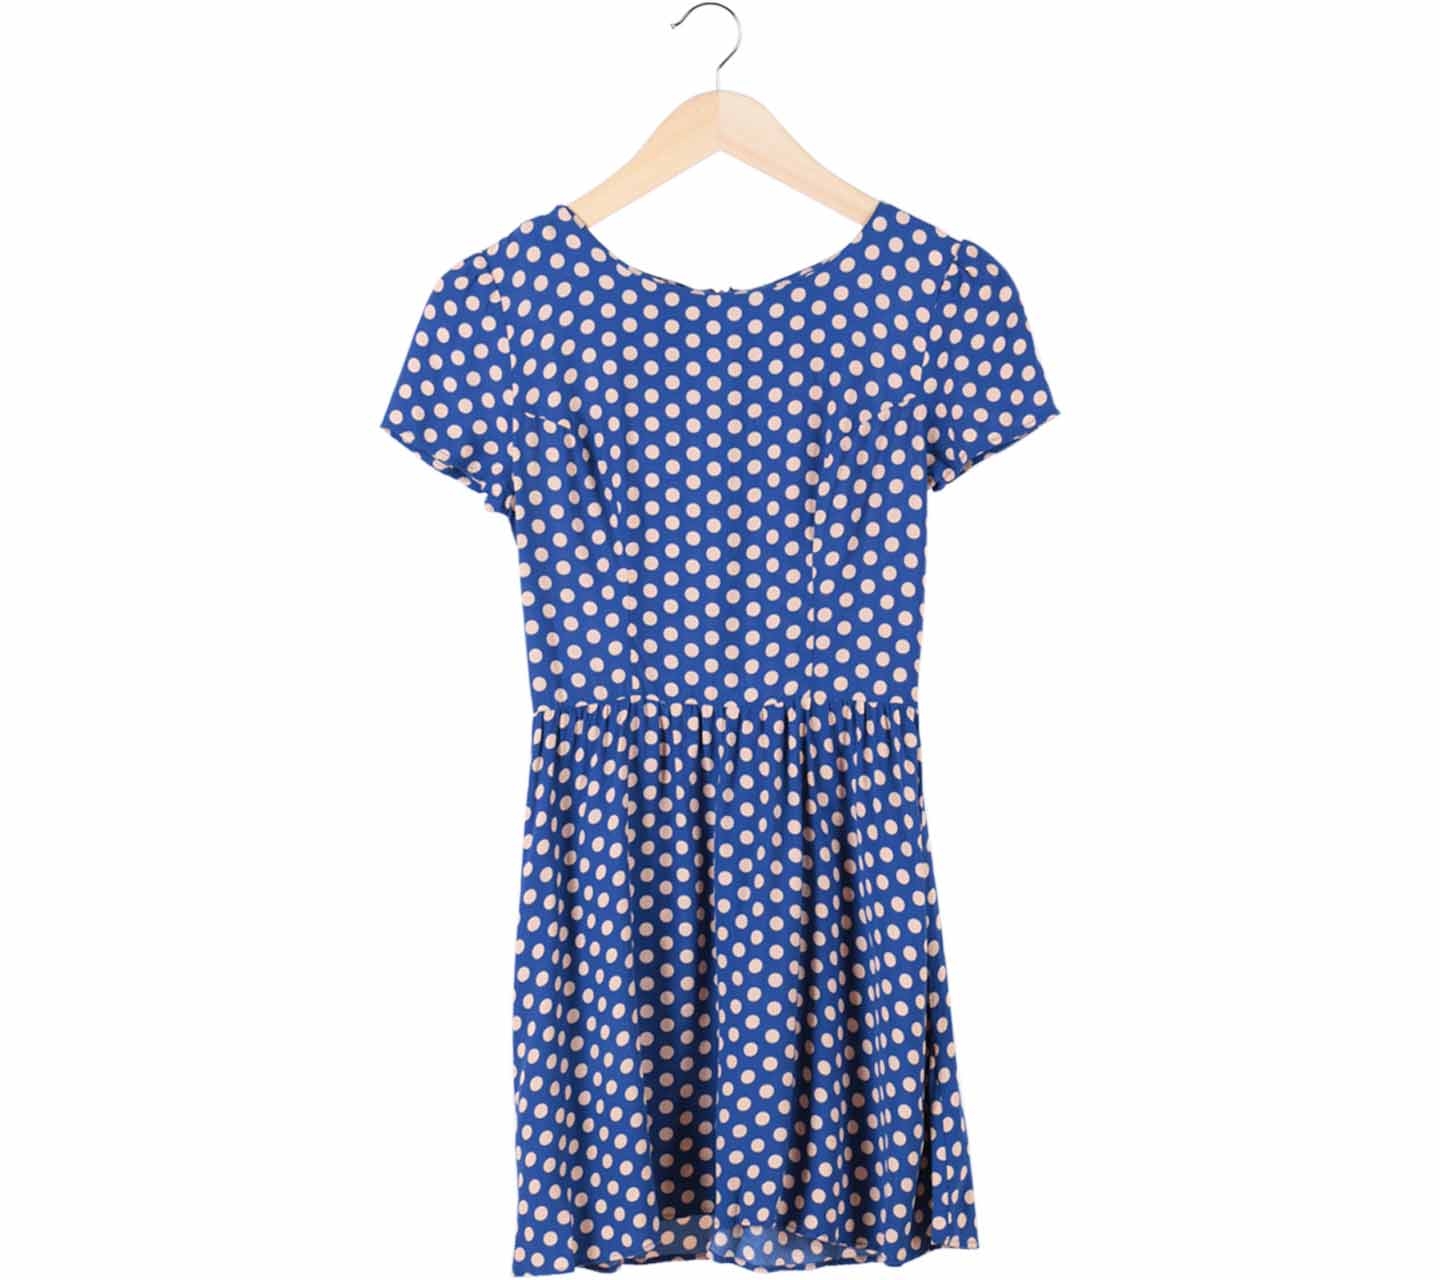 Topshop Blue With Cream Dotted Mini Dress